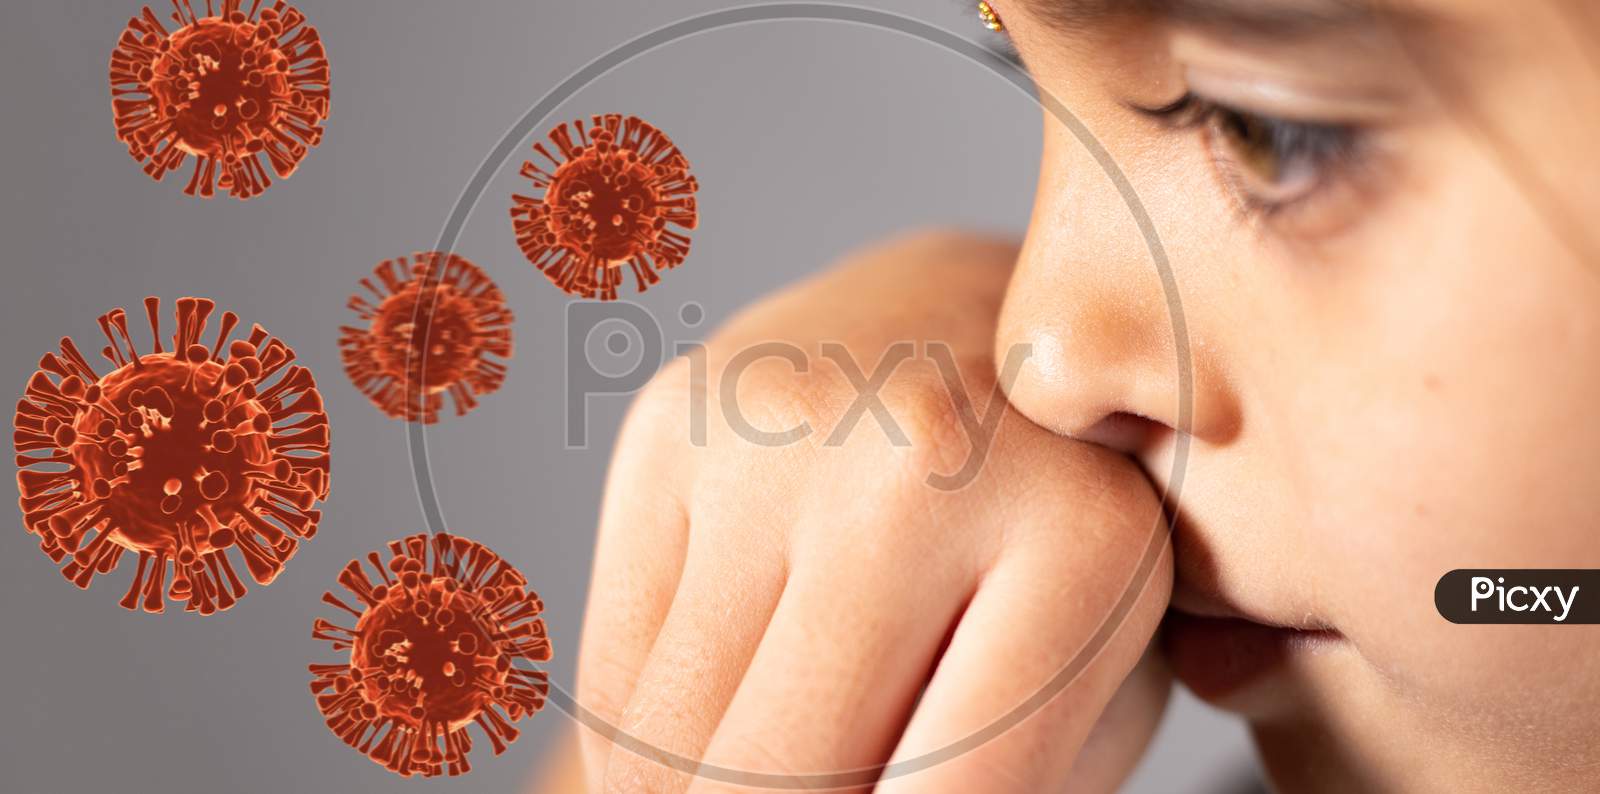 Extreme Close Up Of Child Touch'S Her Nose - Concept Showing To Prevent And Avoid Touching Your Nose. Protect From Covid-19 Or Coronavirus Spreading Or Outbreak - With 3D Rendered Virus